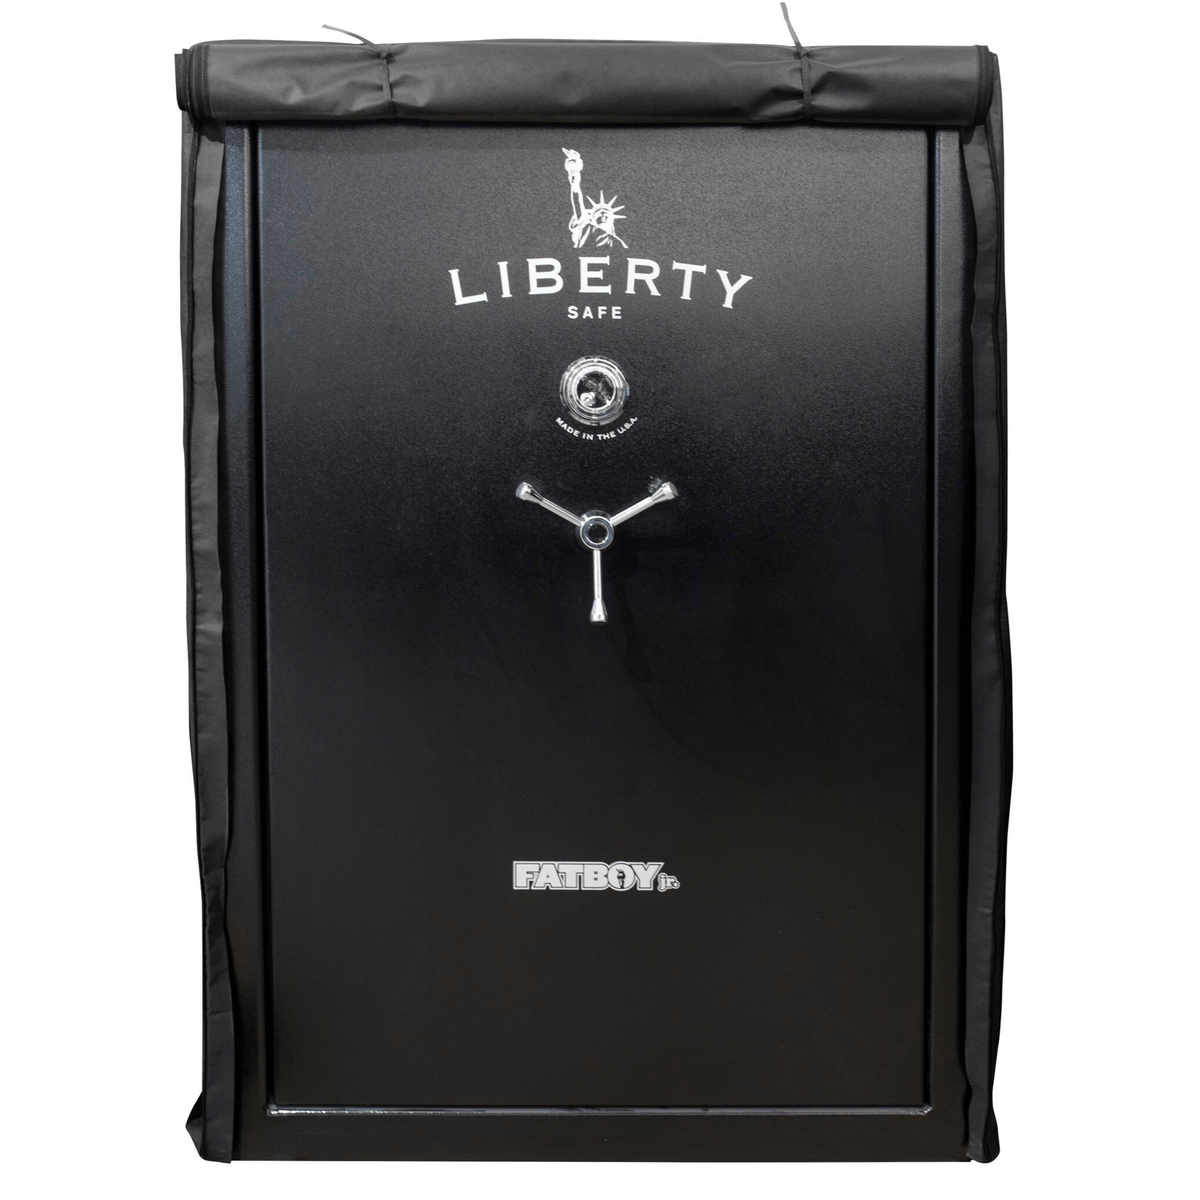 Accessory - Security - Safe Cover Series | Liberty Safe Norcal.